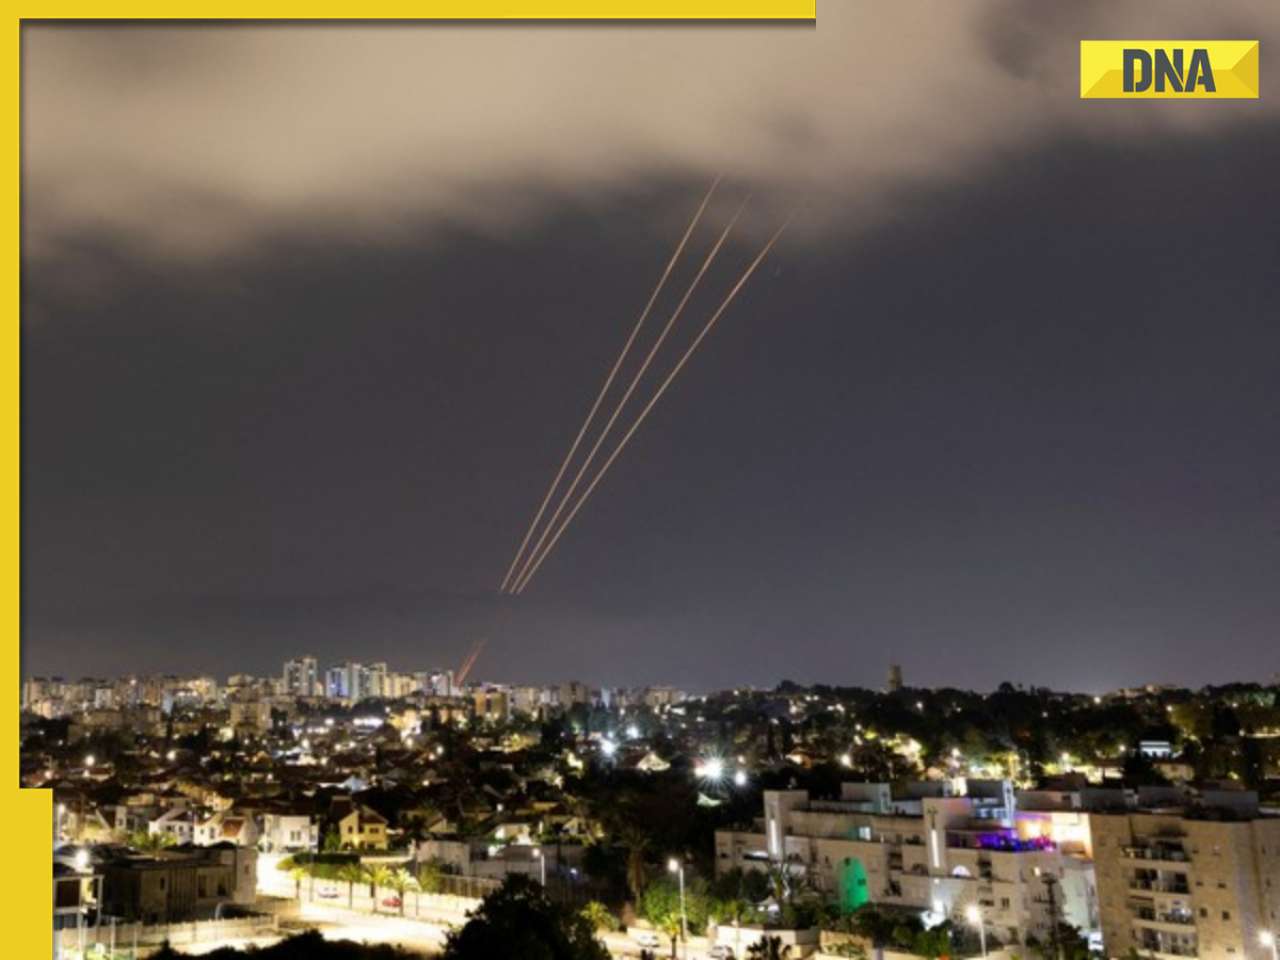 Israel-Iran news live: Israel conducts air strike in Iran in retaliation to missile attack, says report